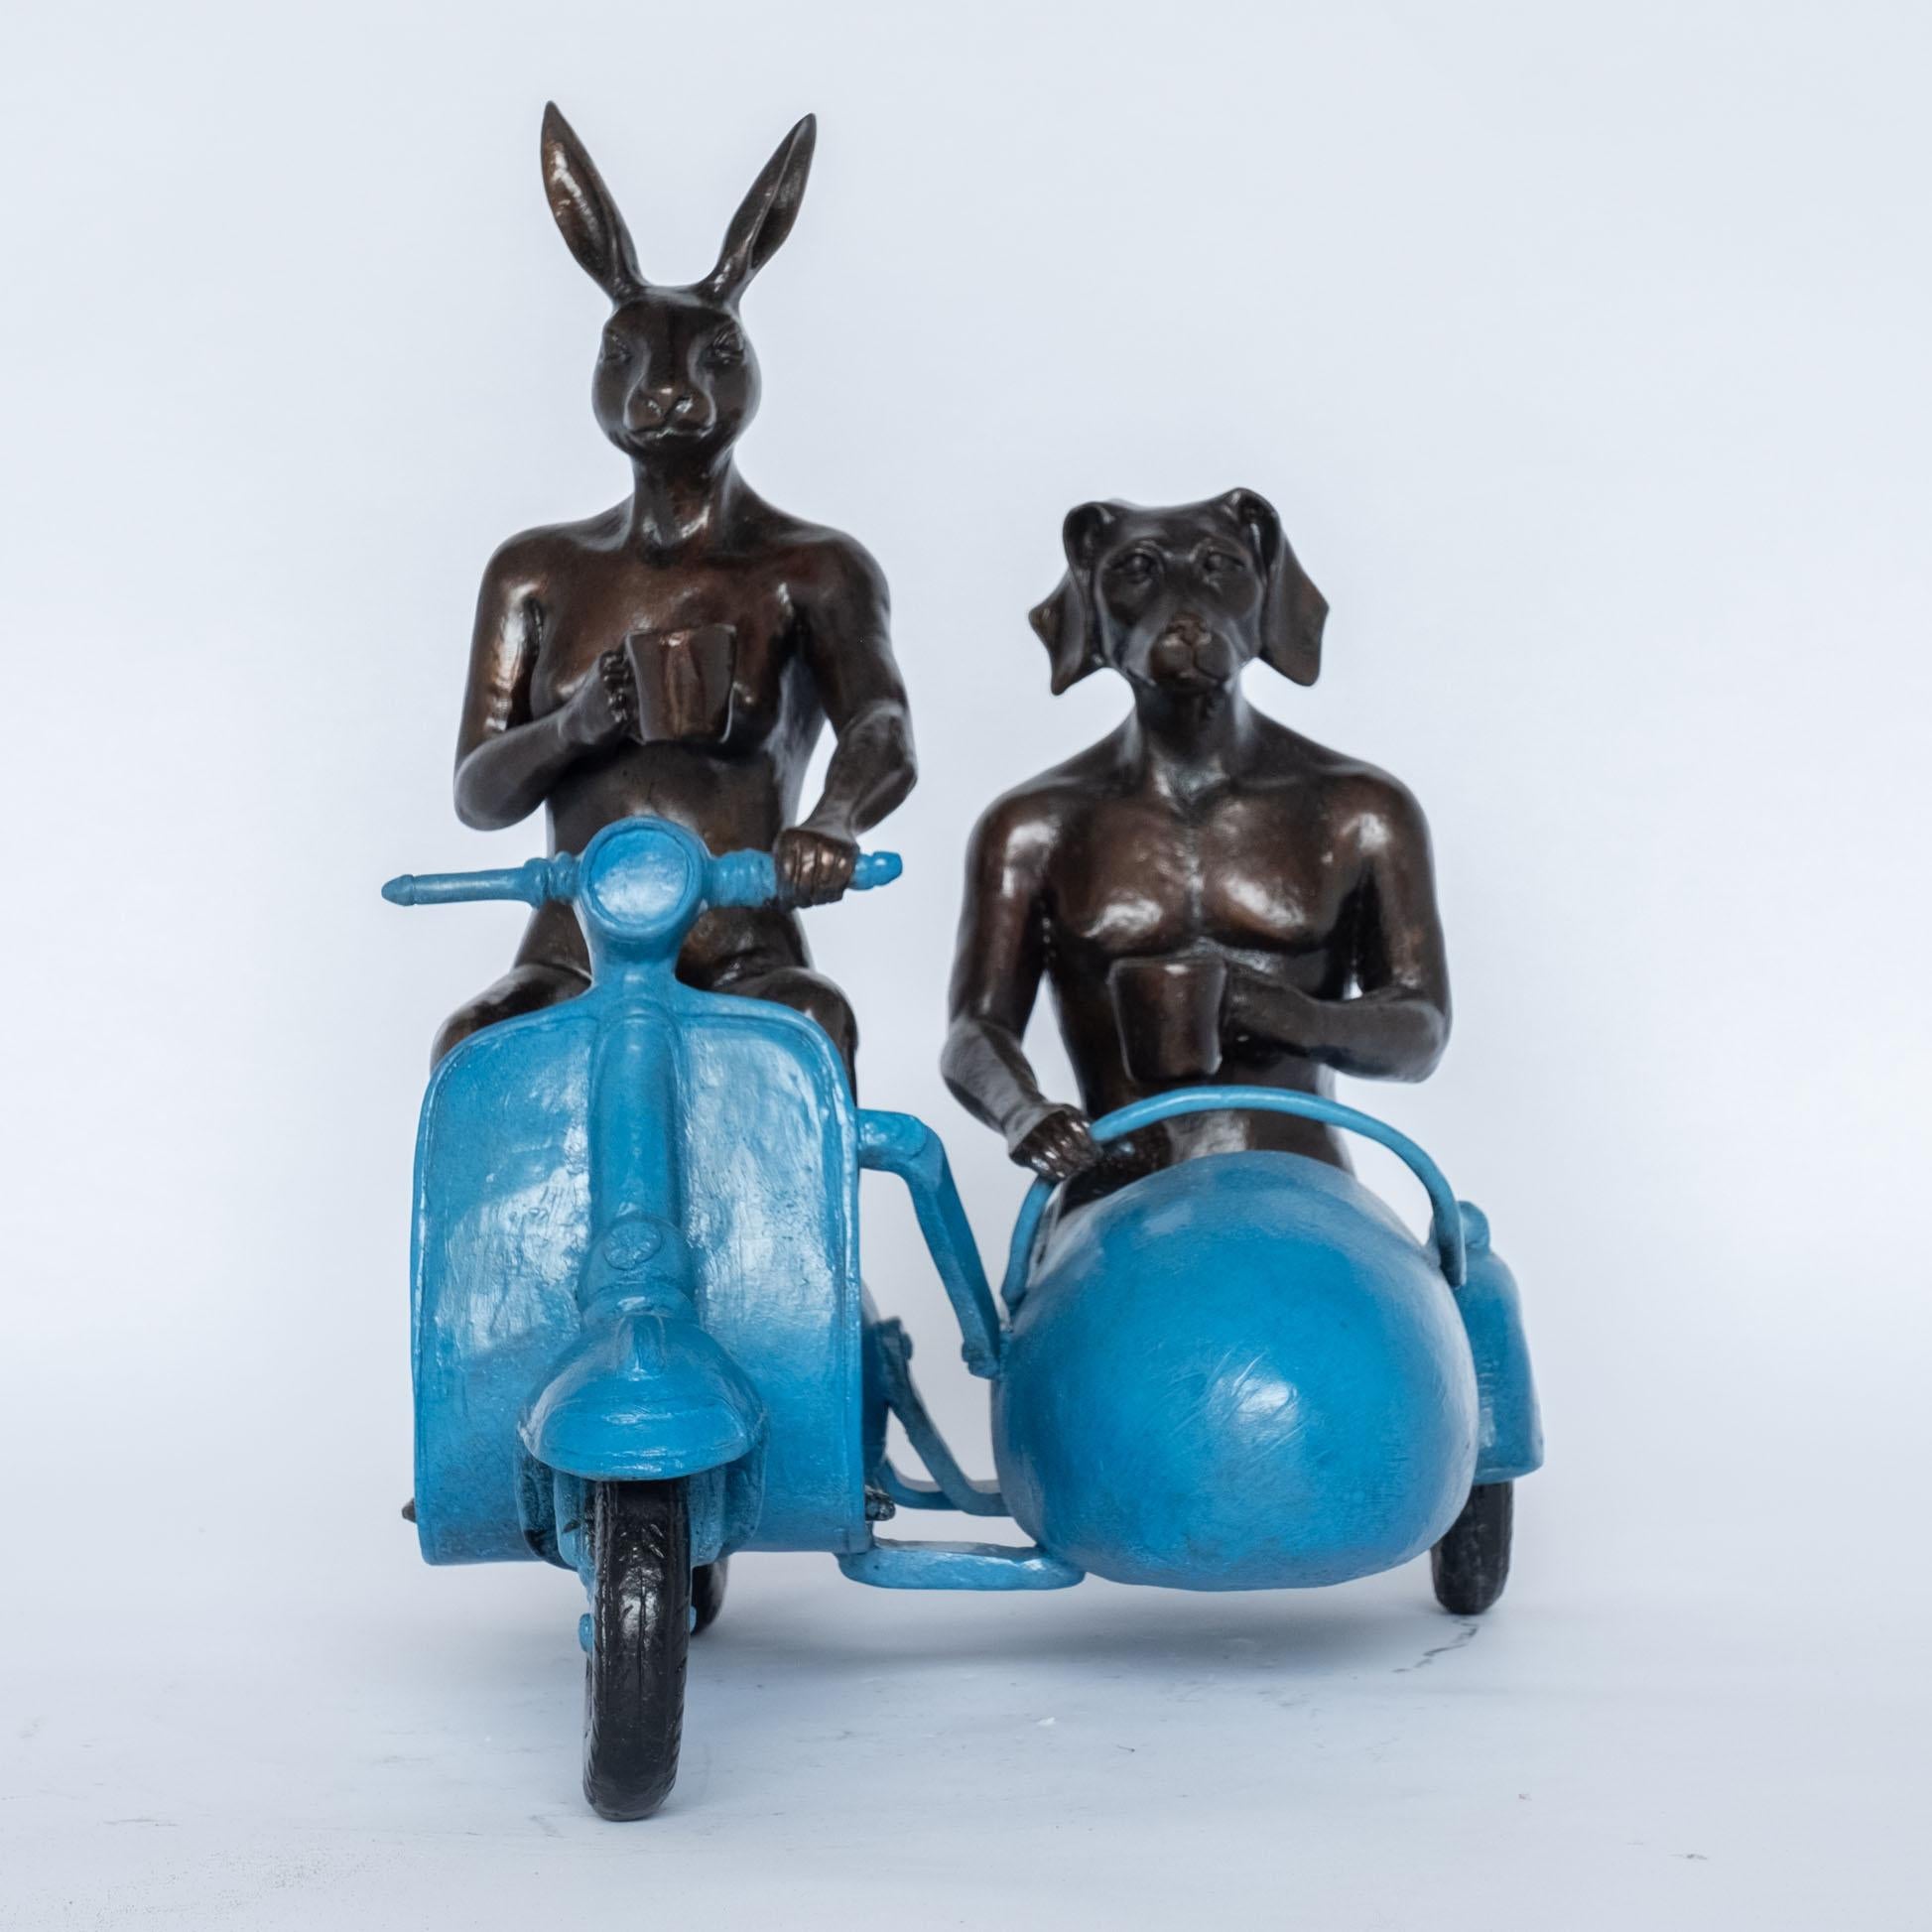 'They were always side by side' by Gillie & Marc, bronze sculpture, patina - Pop Art Sculpture by Gillie and Marc Schattner